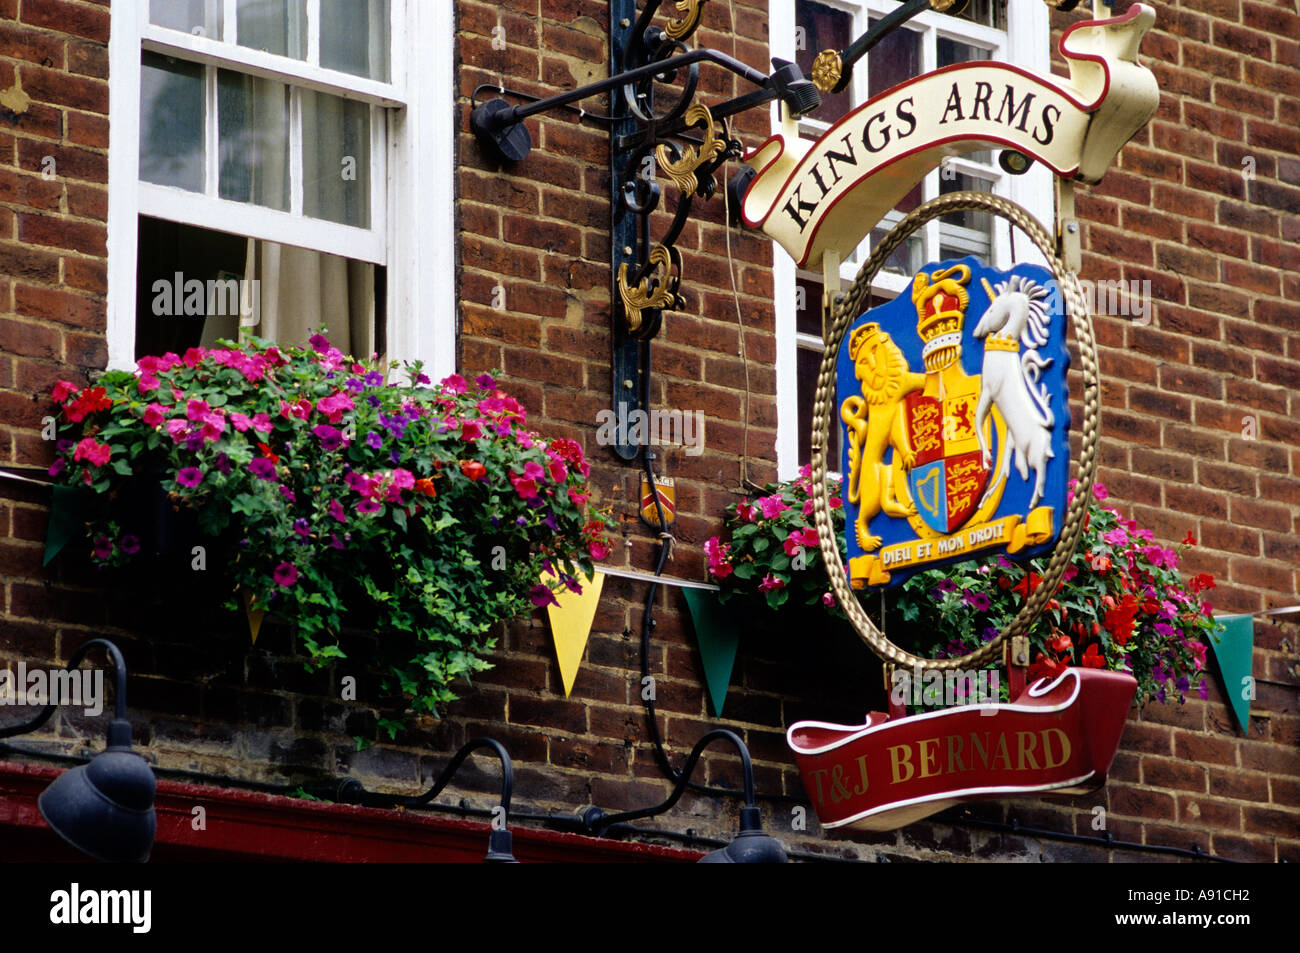 Kings Arms pub in London, England. Stock Photo